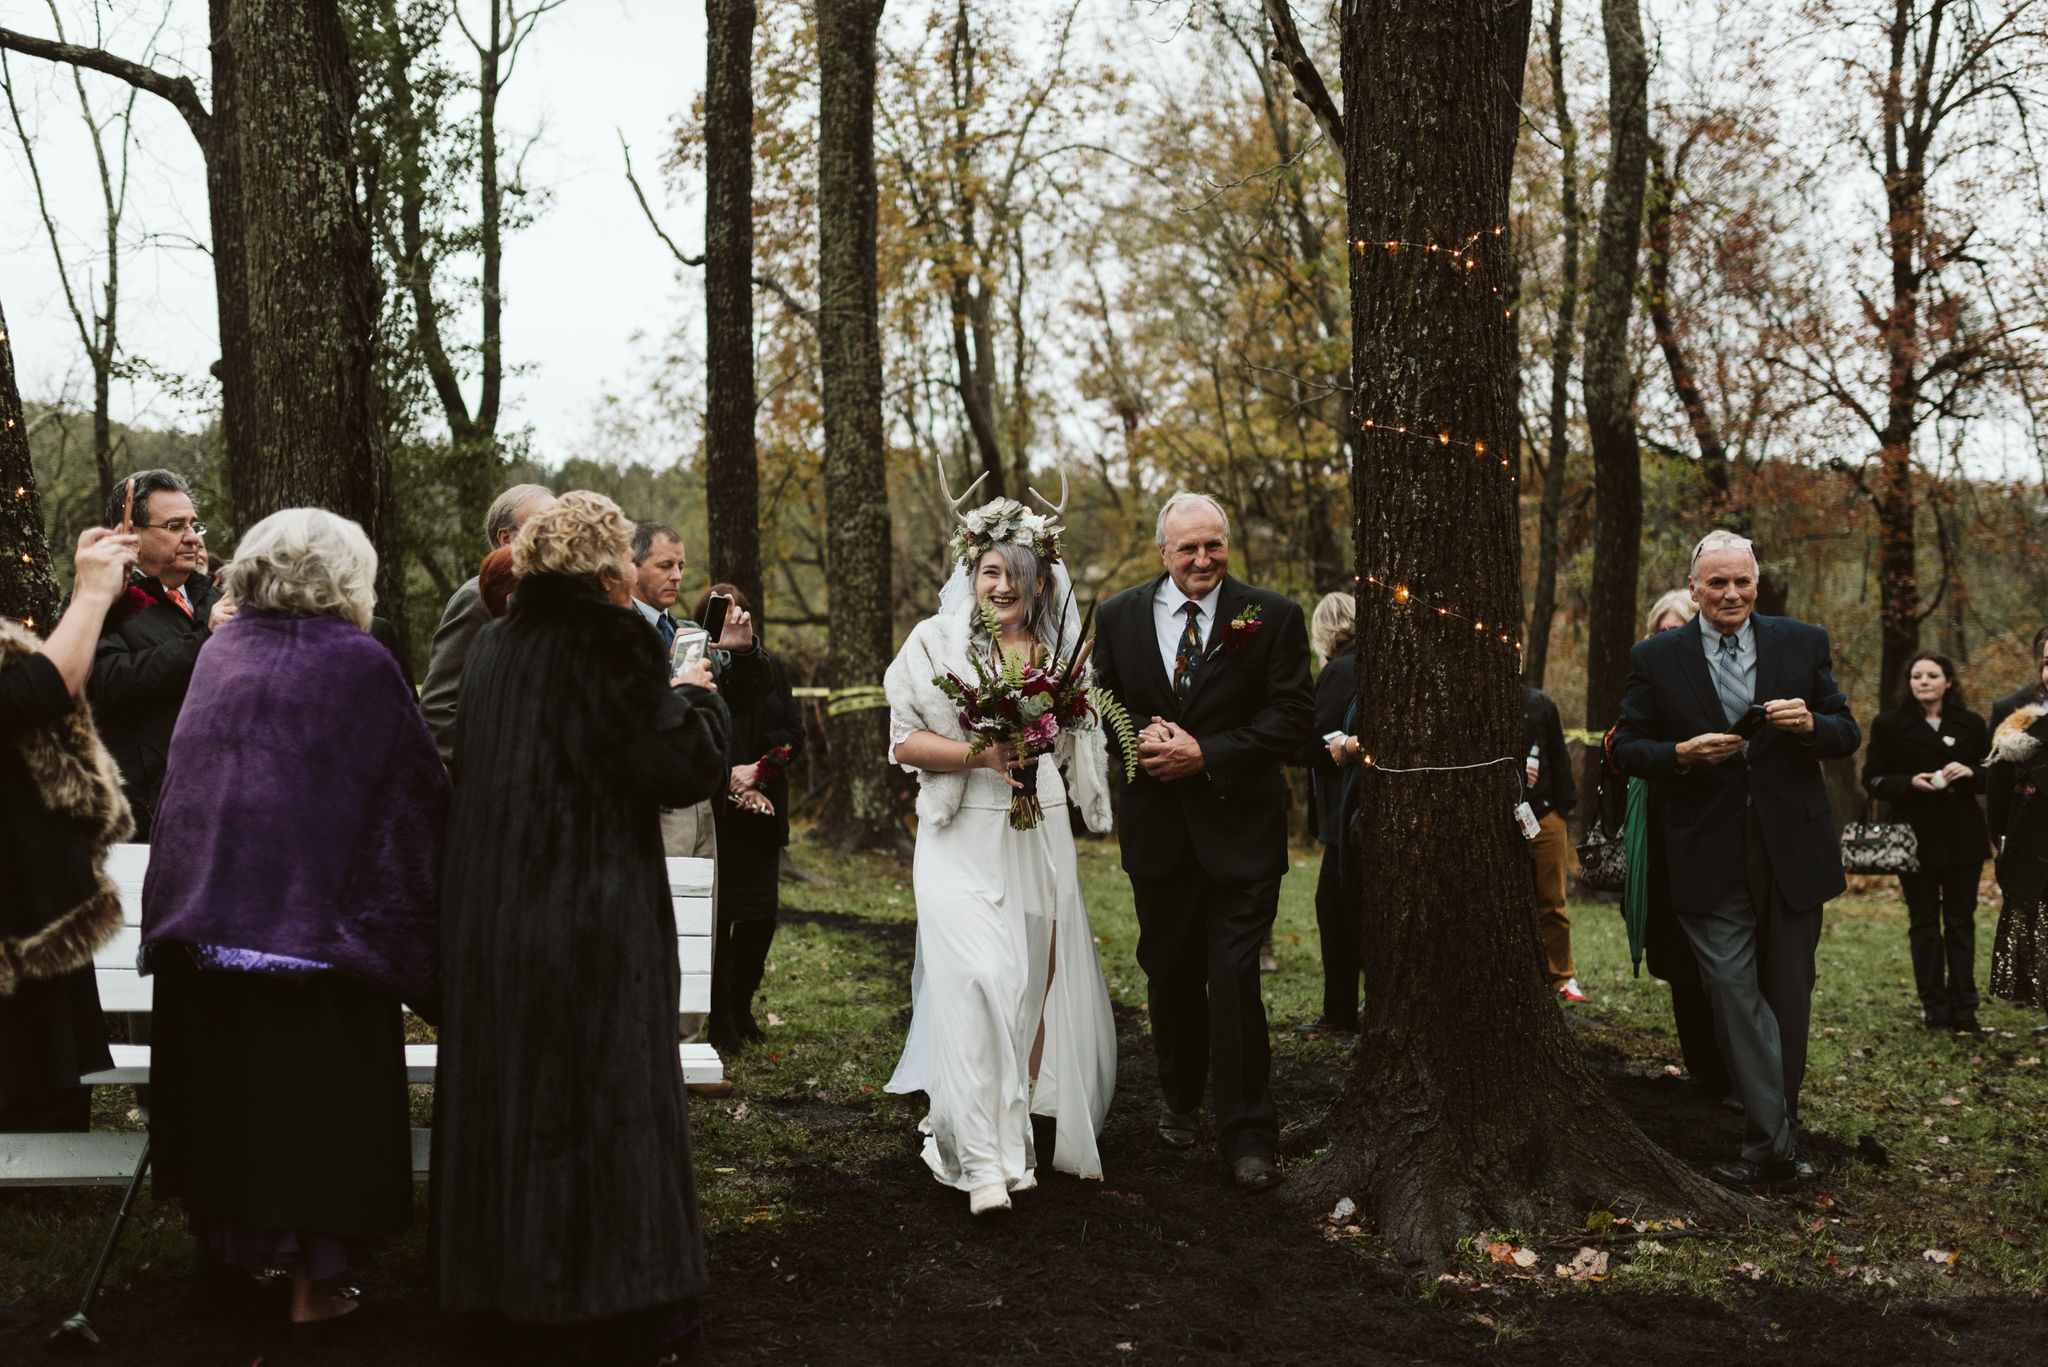  Maryland, Baltimore Wedding Photographer, Backyard Wedding, Fall, October, Dark Bohemian, Whimsical, Fun, Bride Smiling While Walking Down Aisle with Father of the Bride, The Modest Florist 